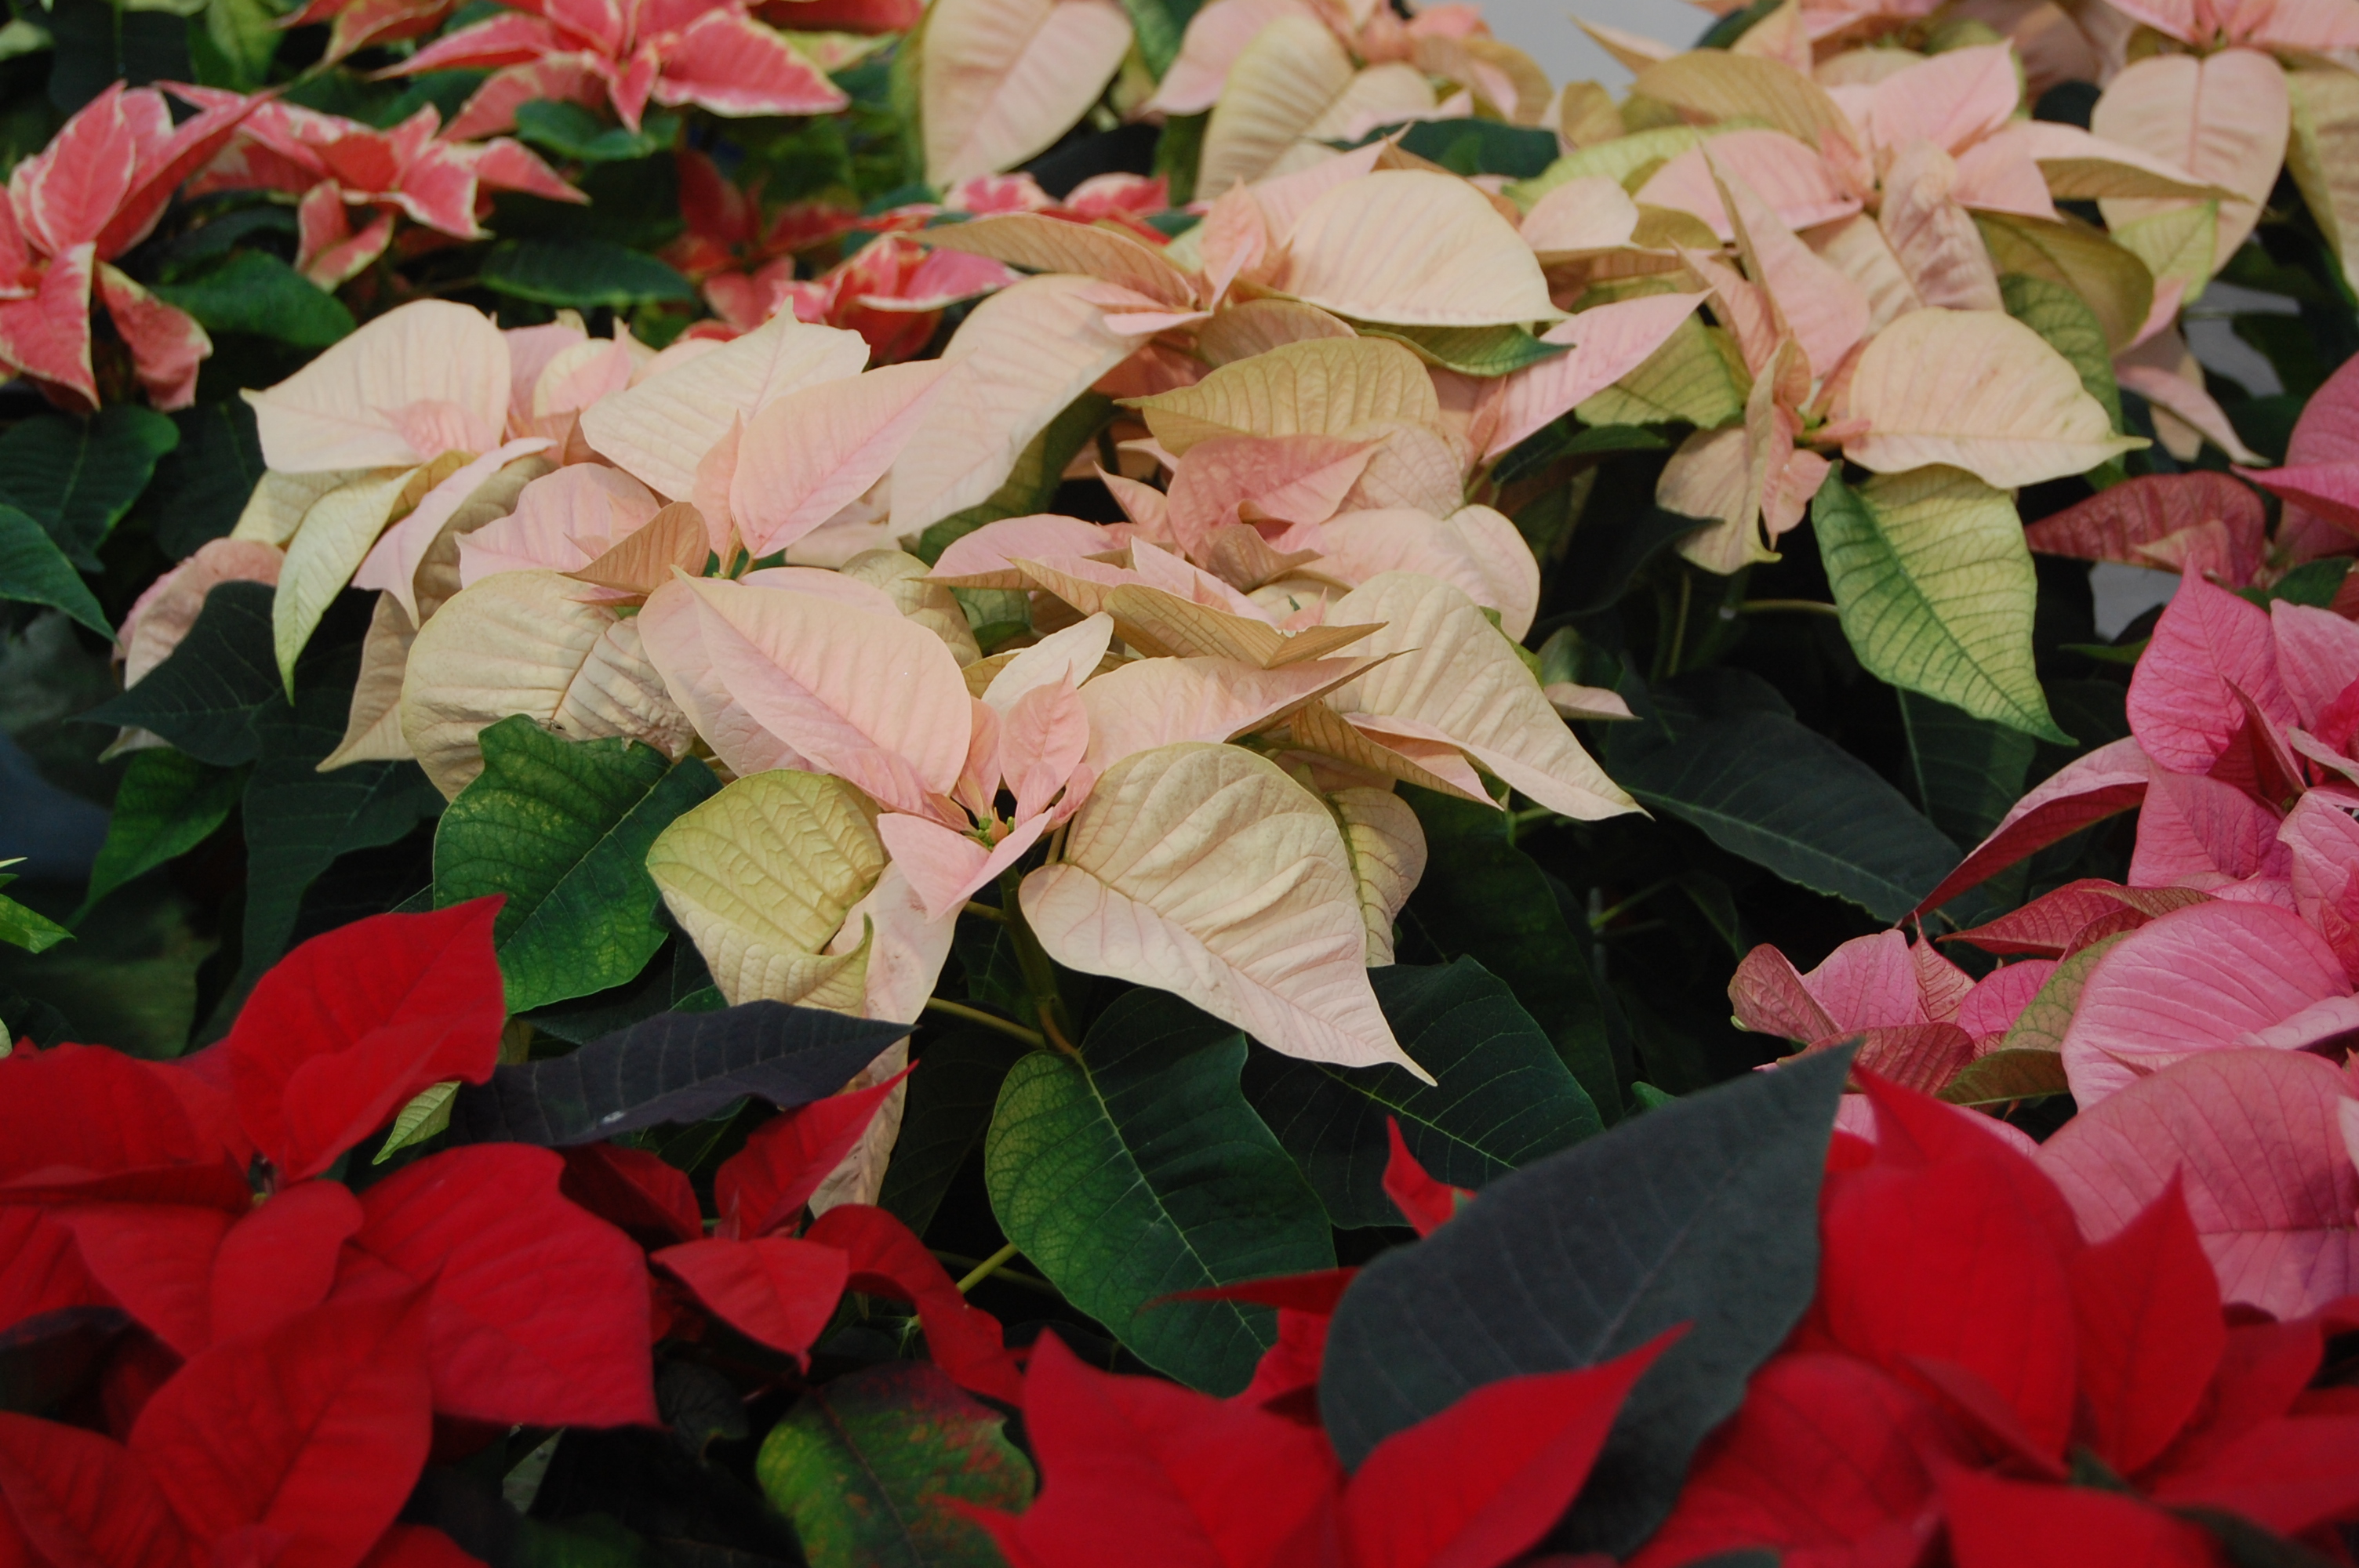 Poinsettia in autumn and winter colours - peachy yellow, pale pink, and red.